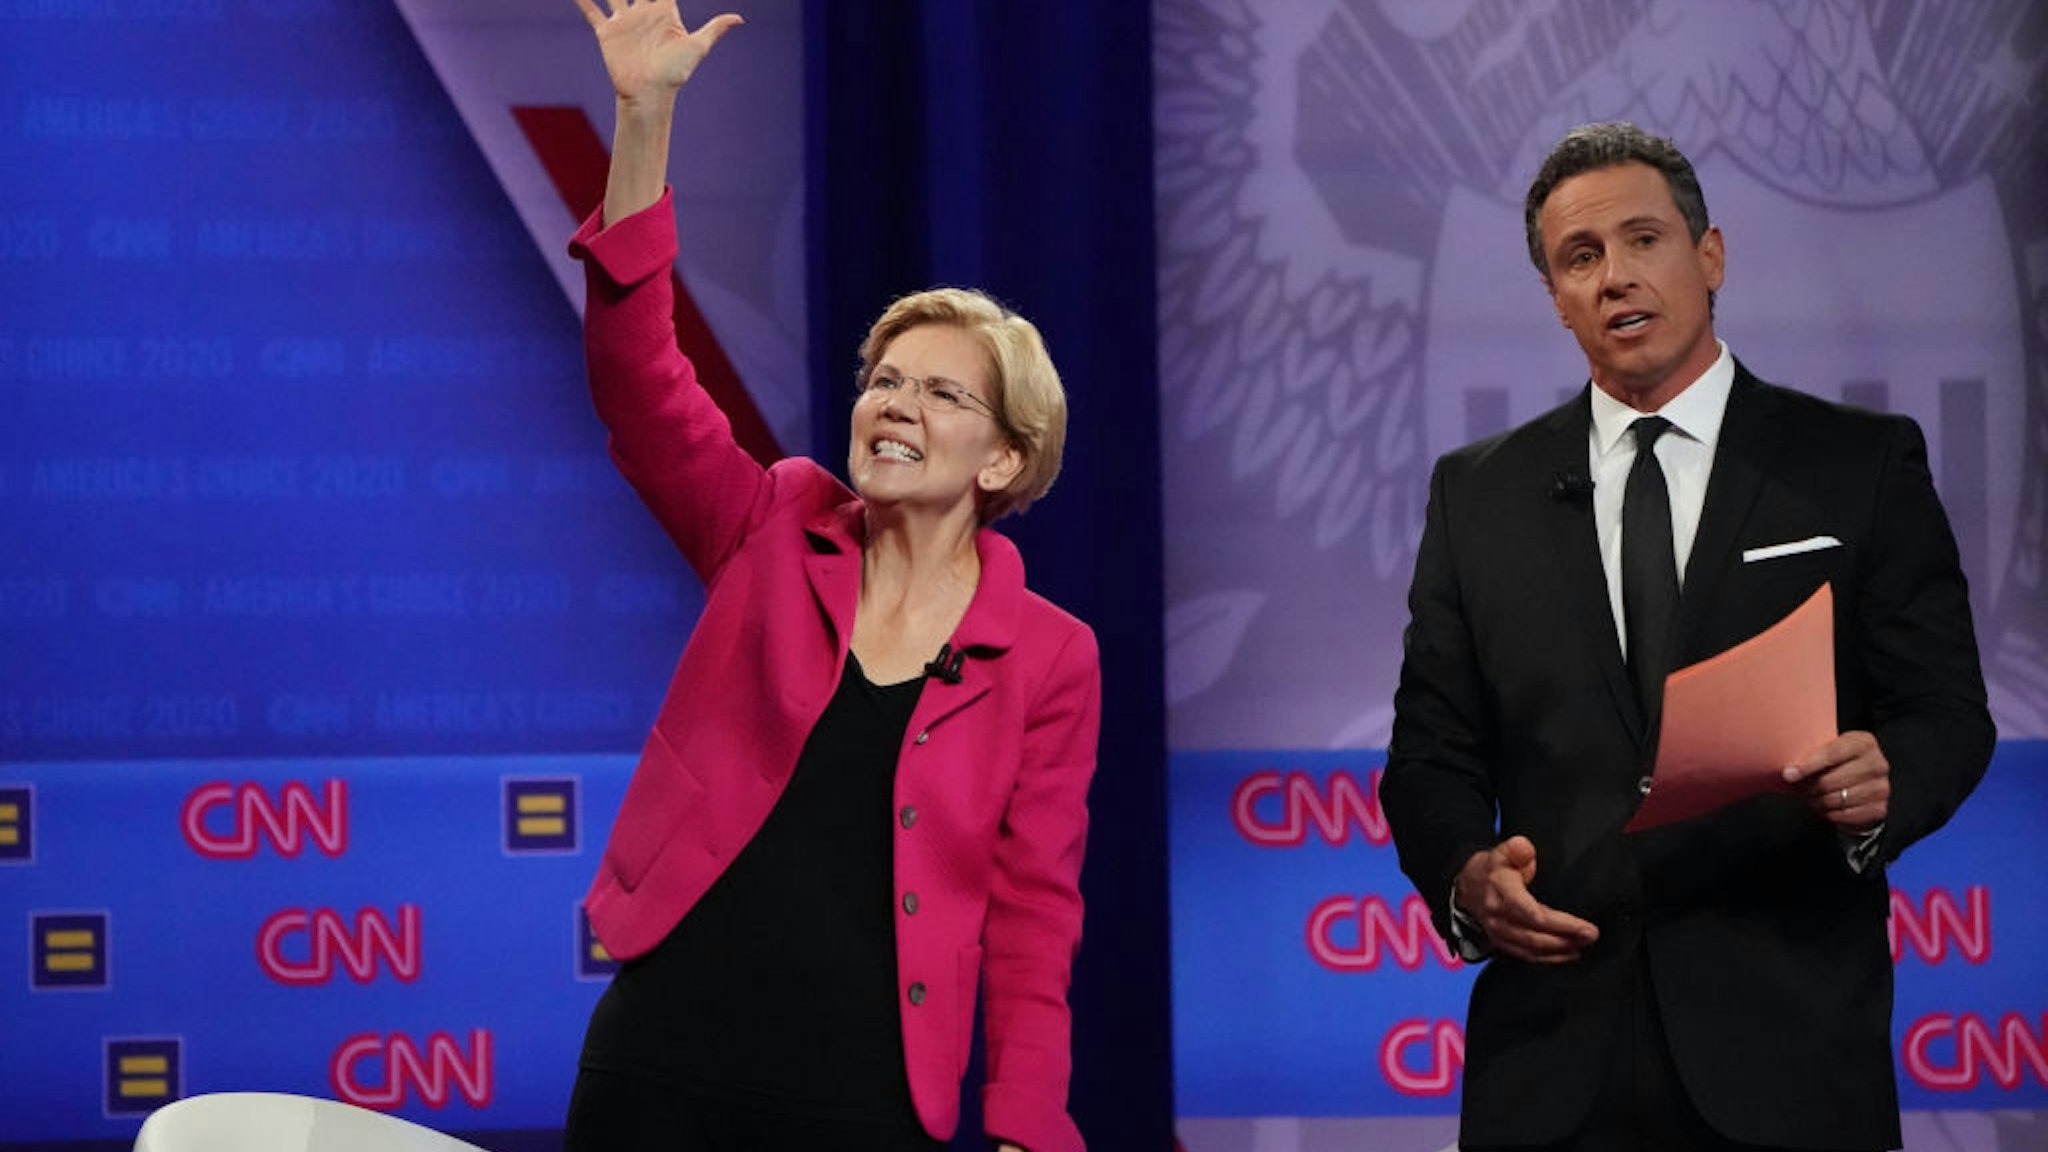 Democratic presidential candidate Sen. Elizabeth Warren (D-MA), L, waves as CNN moderator Chris Cuomo looks on at the Human Rights Campaign Foundation and CNN’s presidential town hall focused on LGBTQ issues on October 10, 2019 in Los Angeles, California.